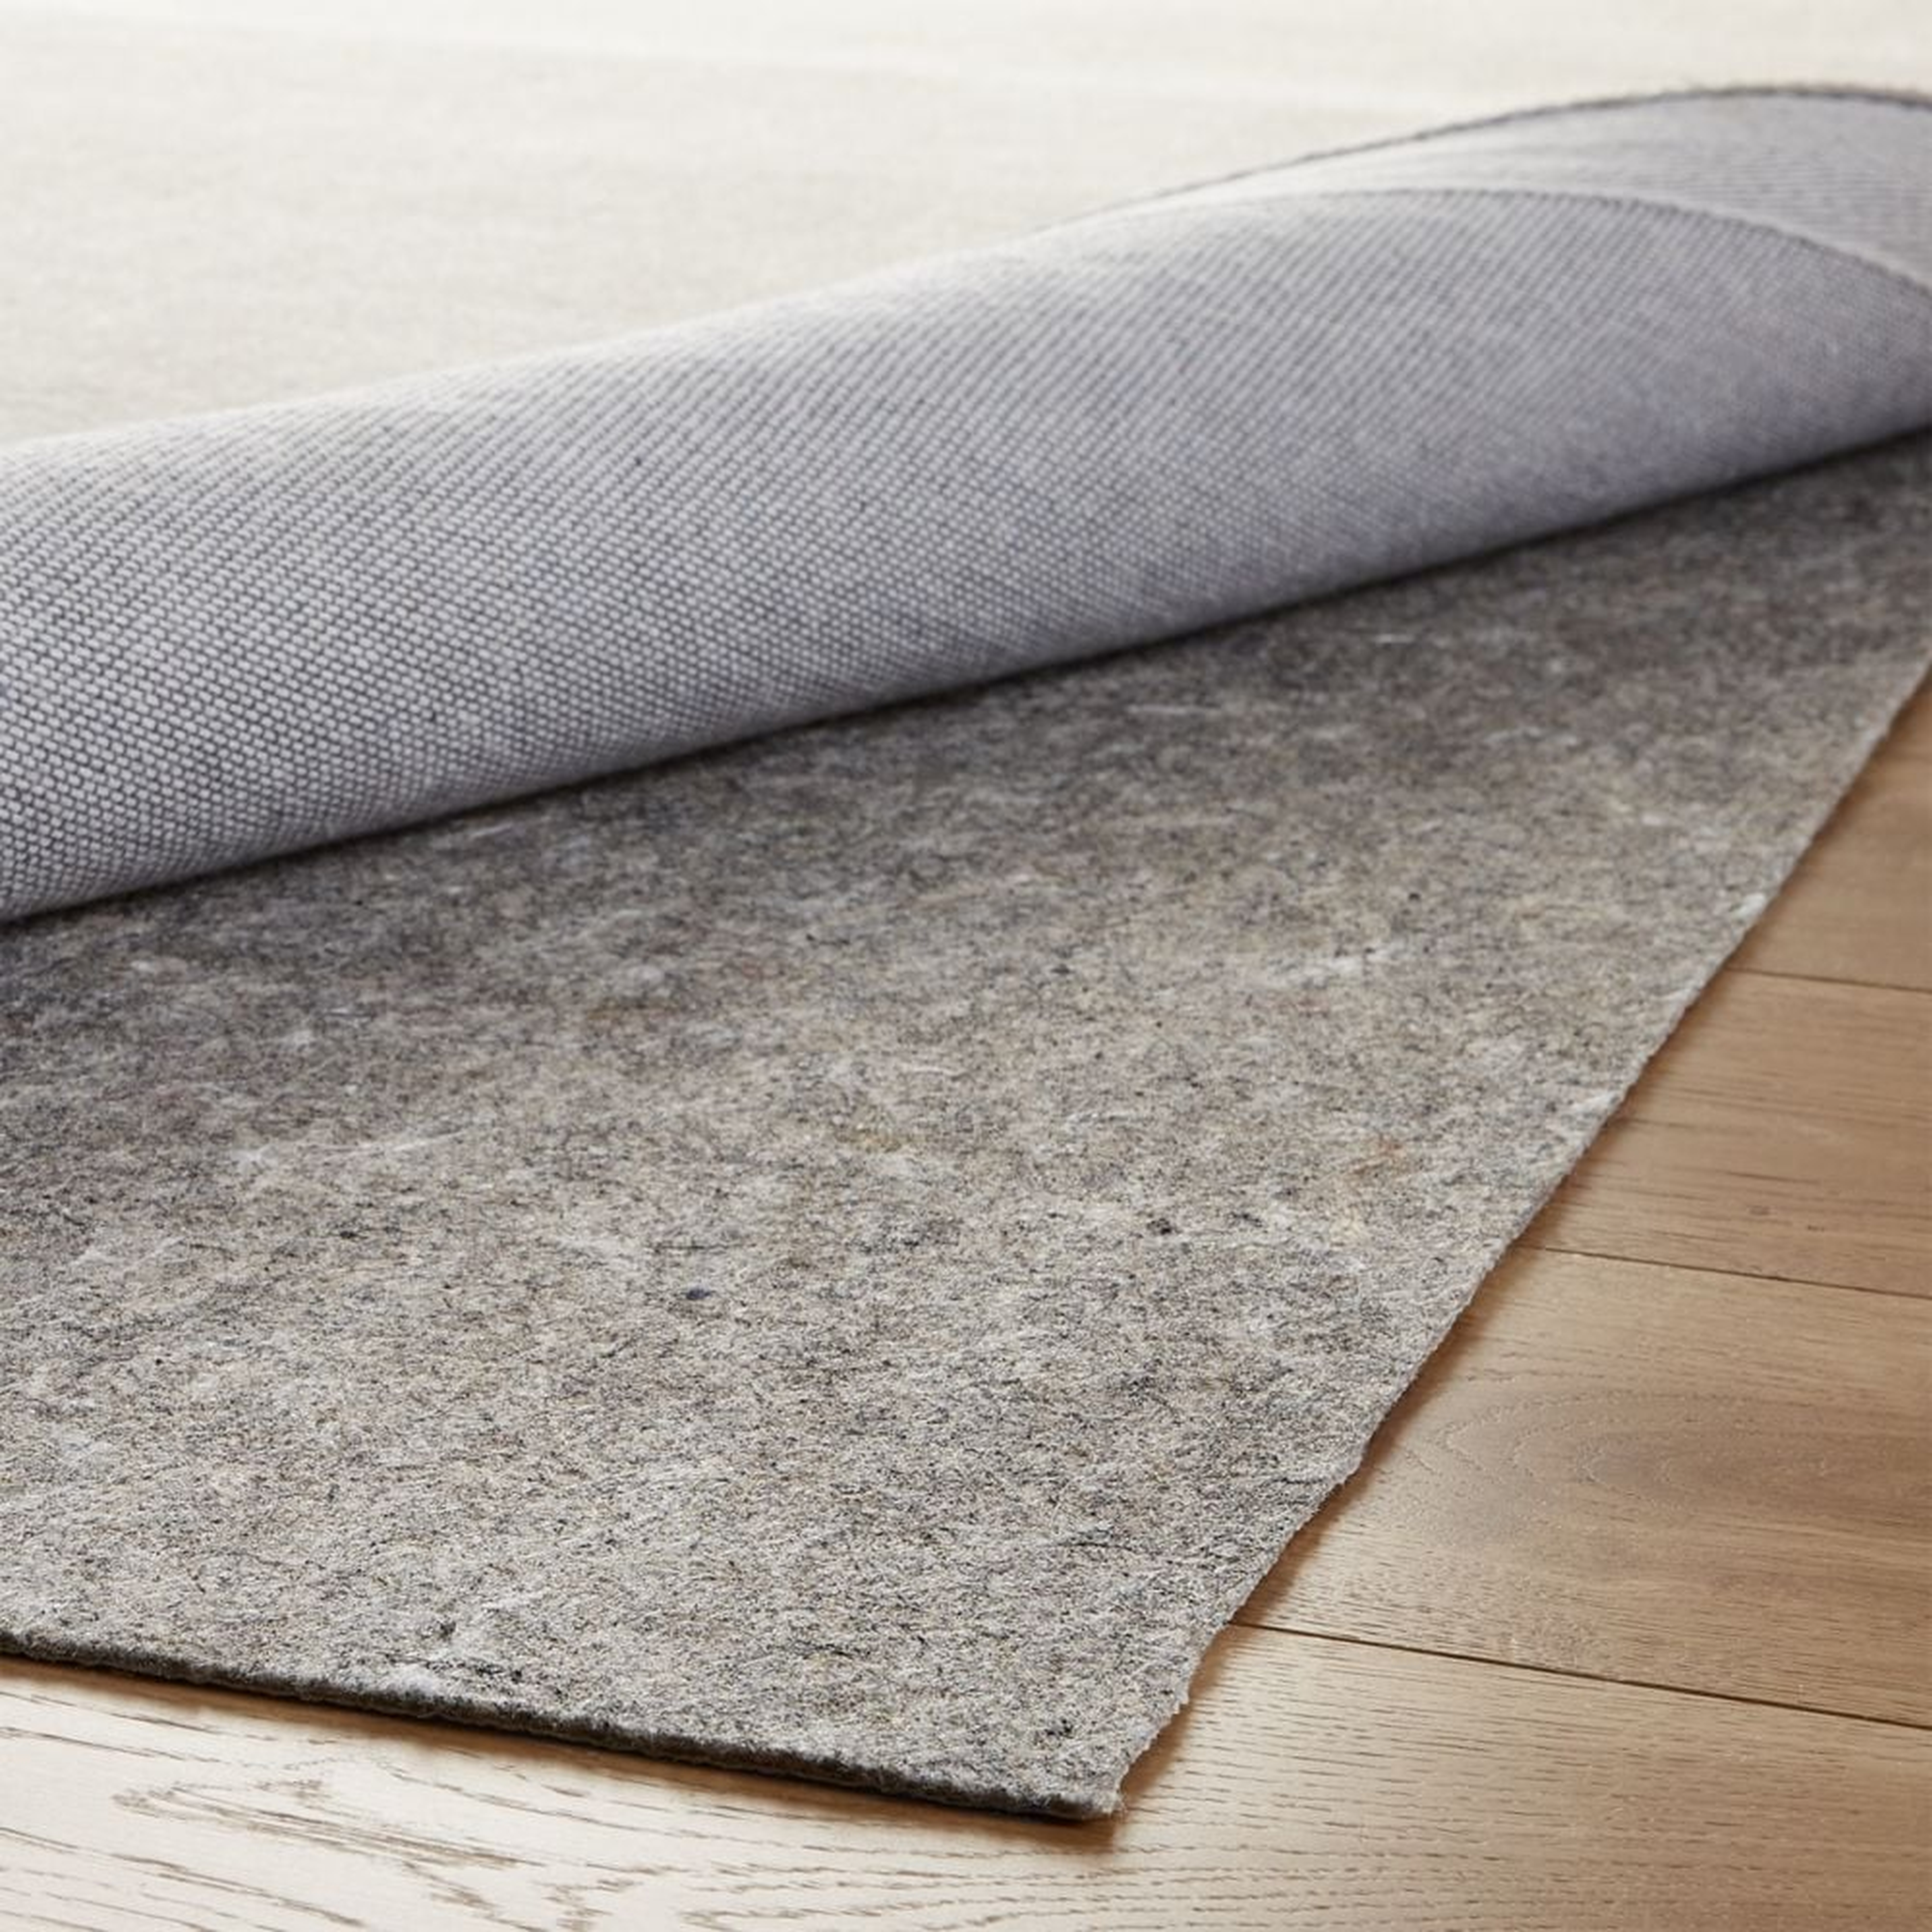 Multisurface 8'x10' Thin Rug Pad - Crate and Barrel